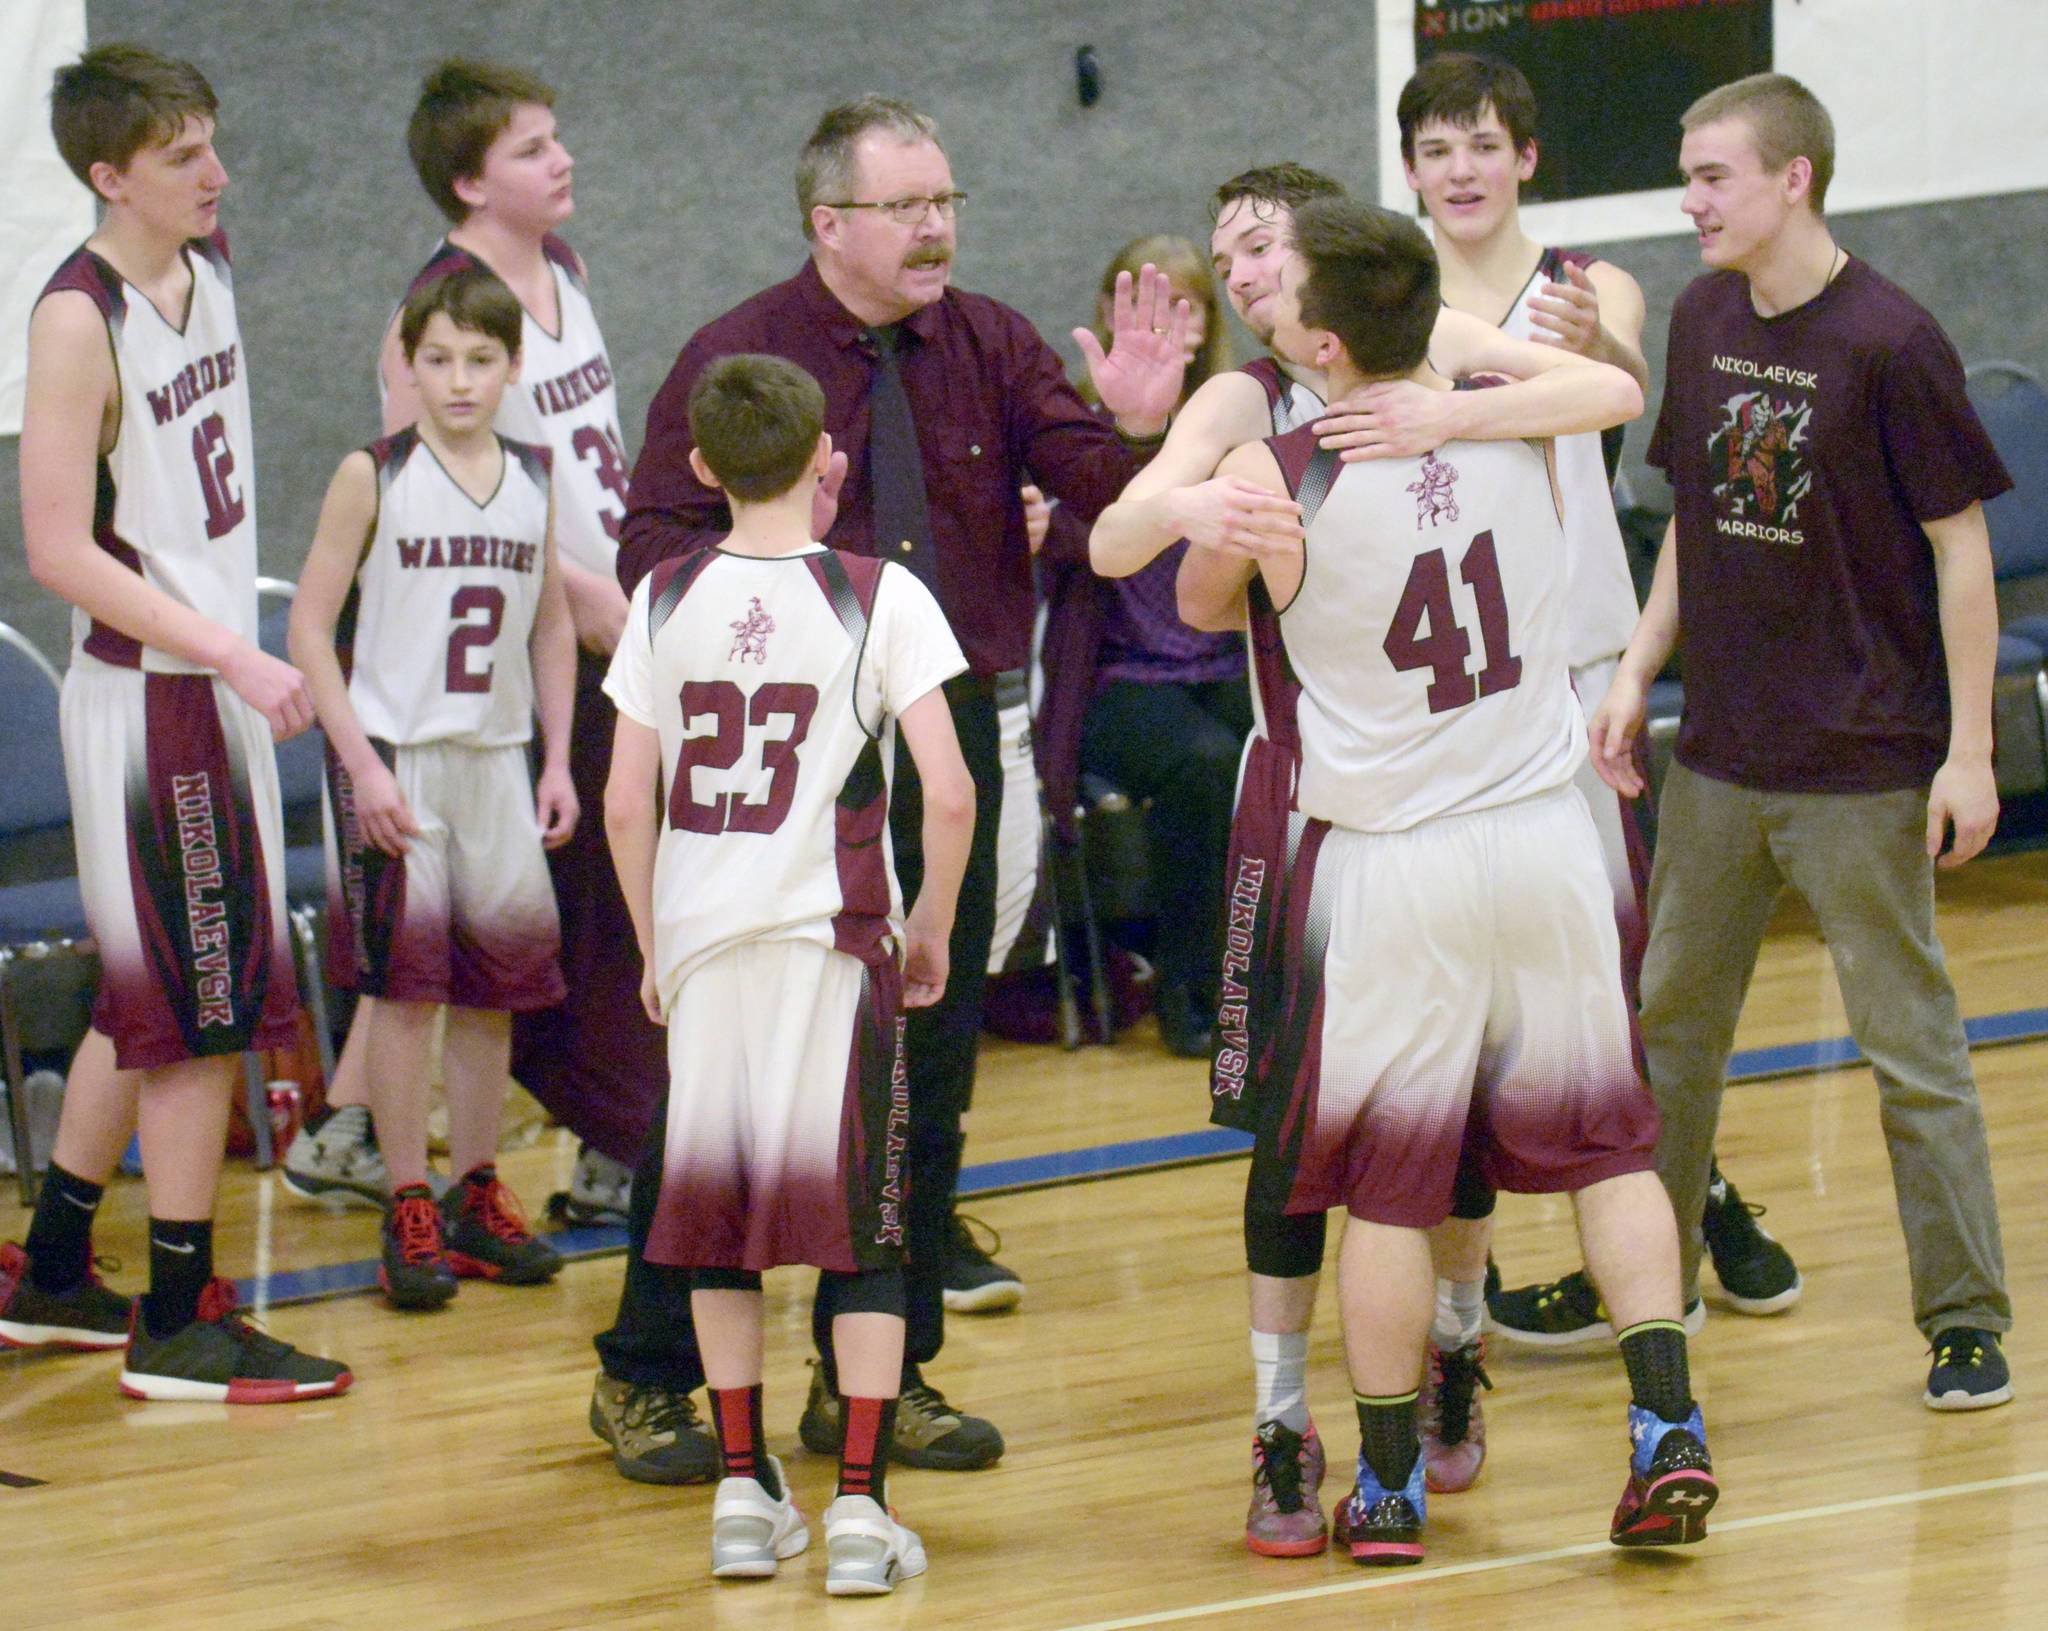 Nikolaevsk coach Steve Klaich celebrates with his team after winning his first Peninsula Conference title in his 30th season at the helm Friday at Cook Inlet Academy in Soldotna. (Photo by Jeff Helminiak/Peninsula Clarion)